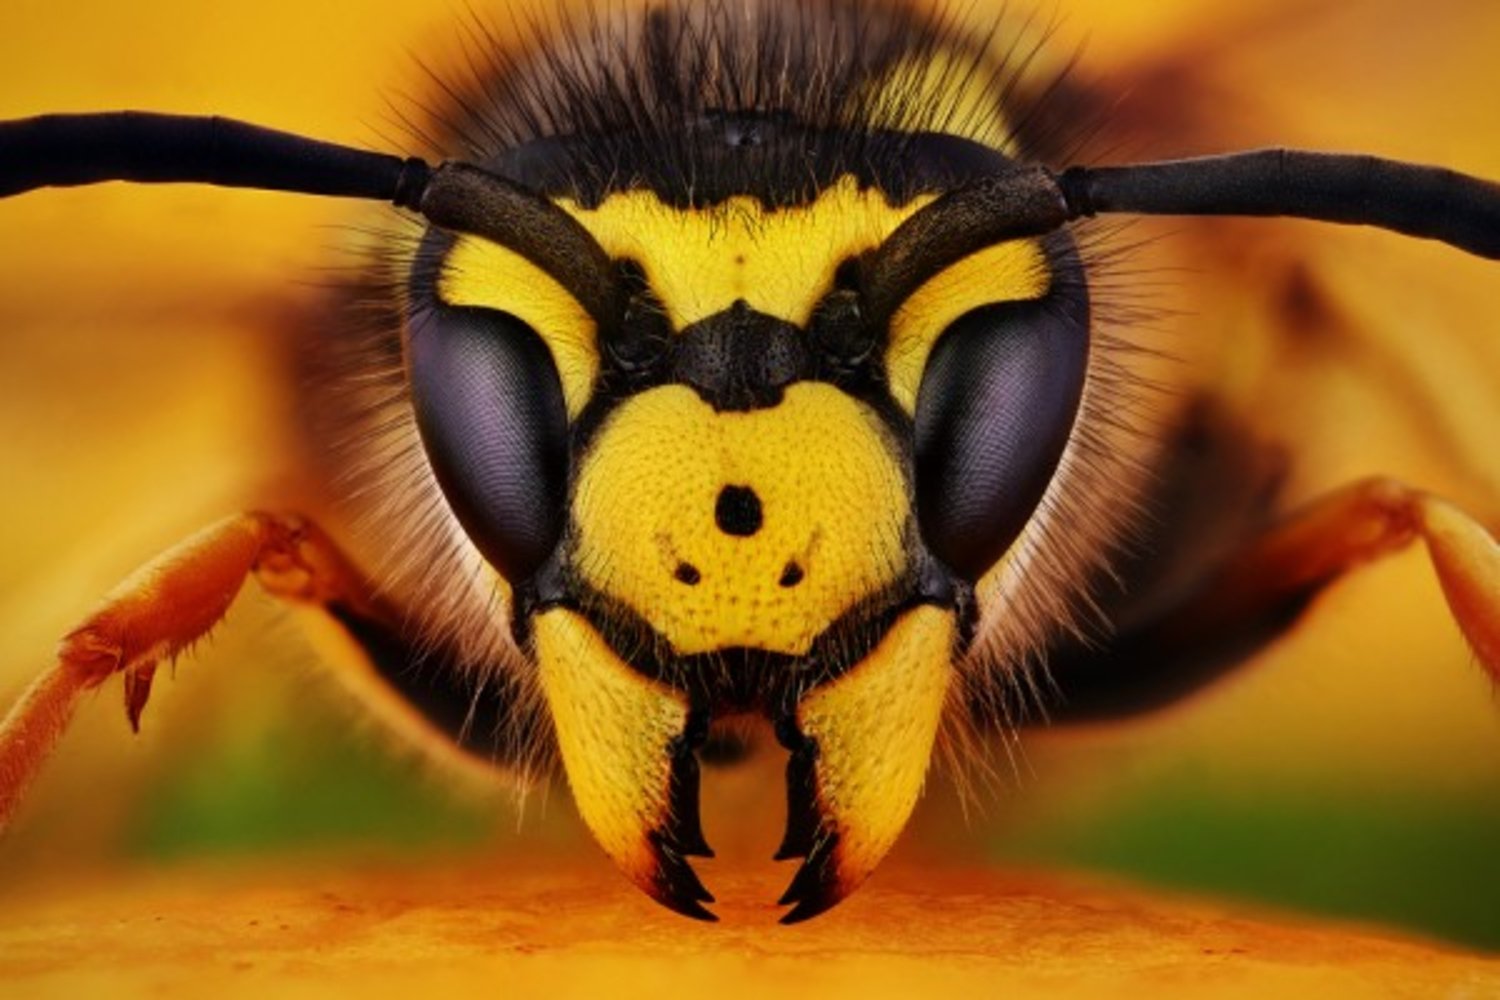 Bees have five eyes